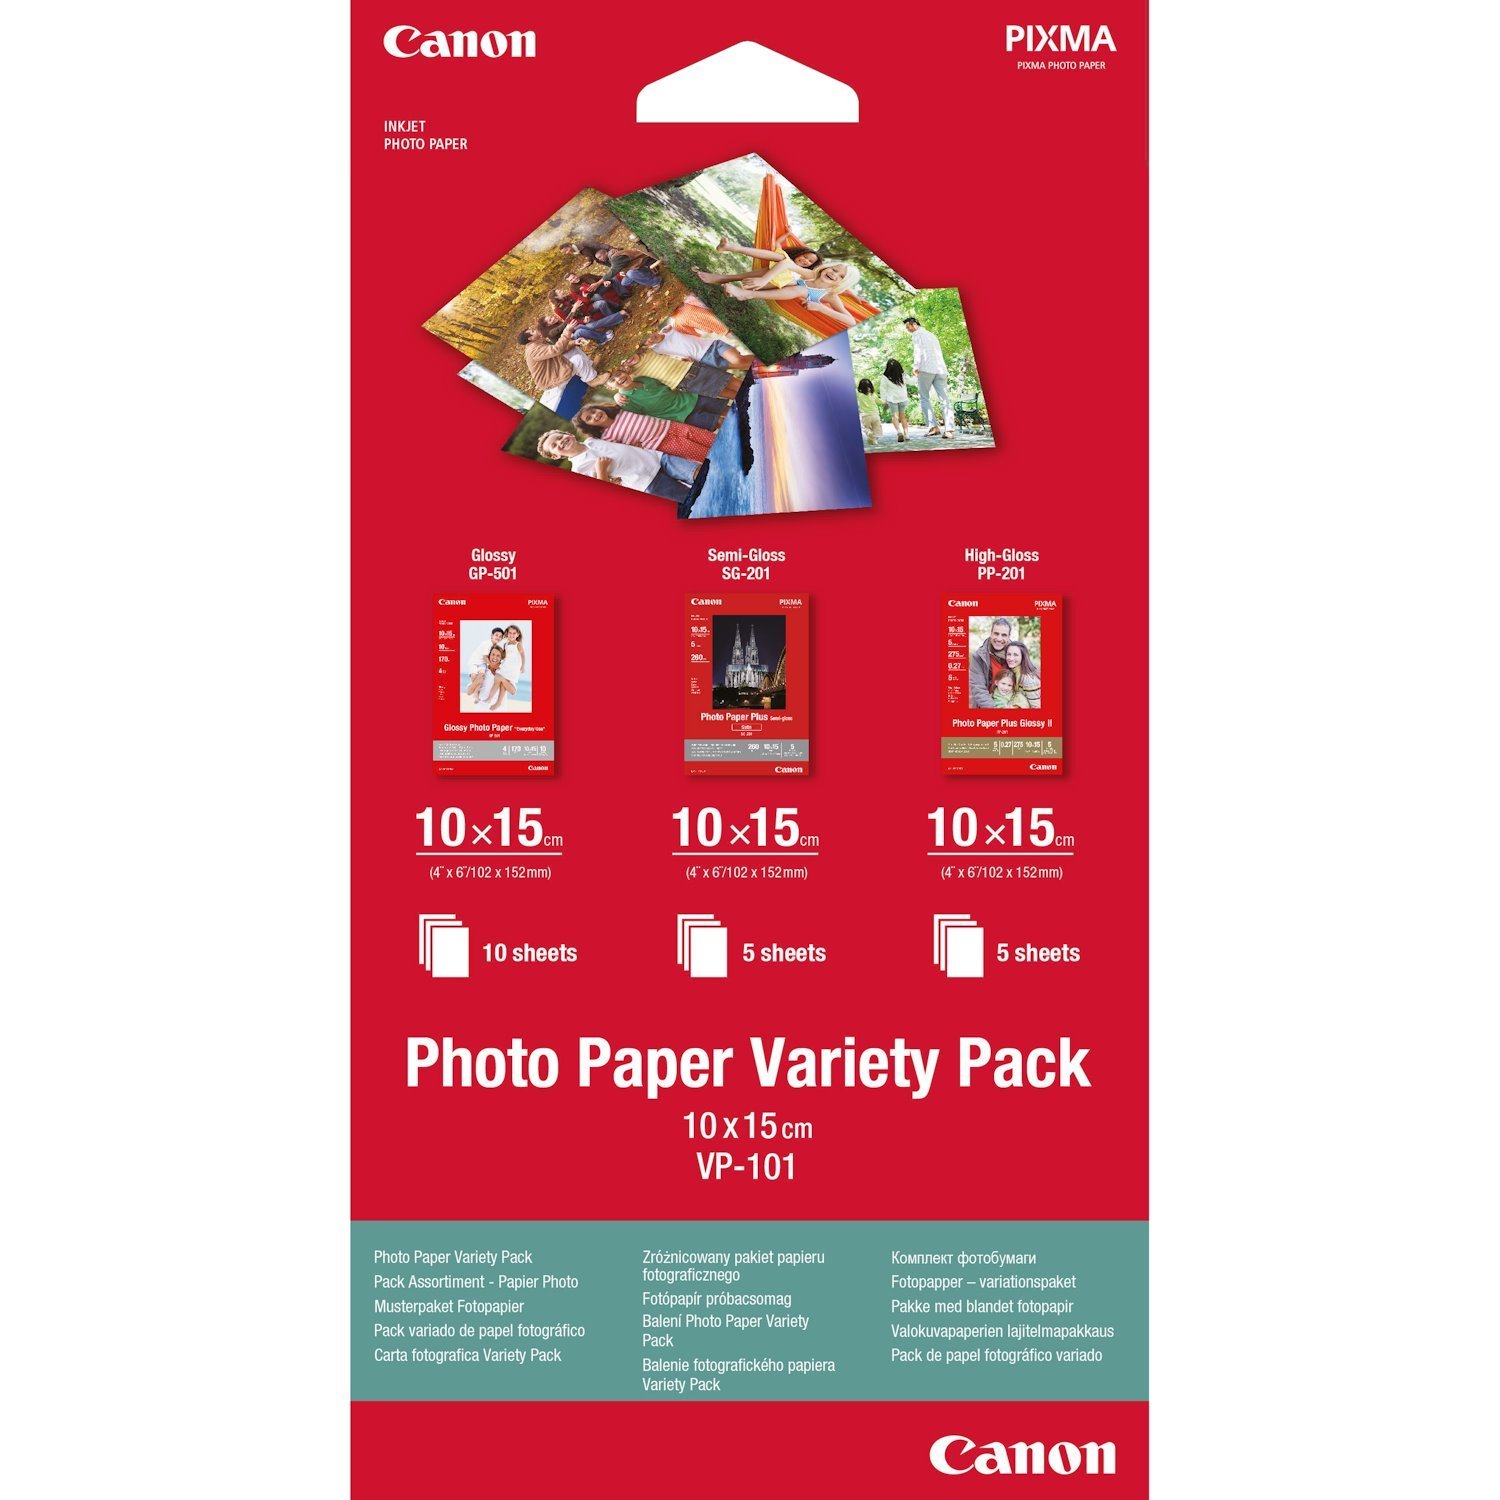 Canon VP-101 Photo Paper Variety Pack 4X6” - 20 Sheets (Canon VP-101 Photo Paper Variety Pack 10CM X 15CM 20 Sheets - 0775B078)